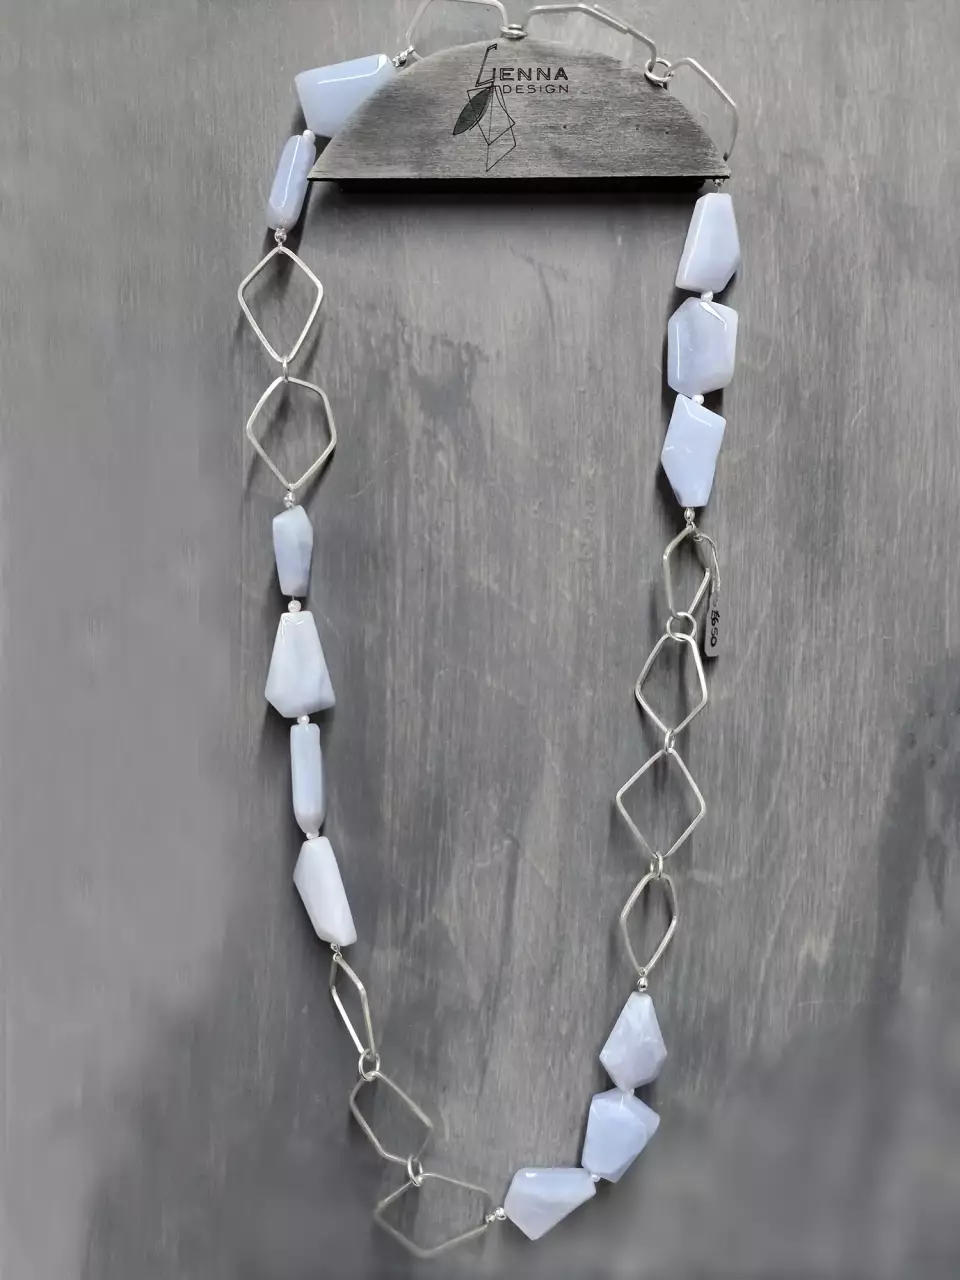 chalcedony necklace with pearls and hex shaped silver links on display board showing full length of necklace